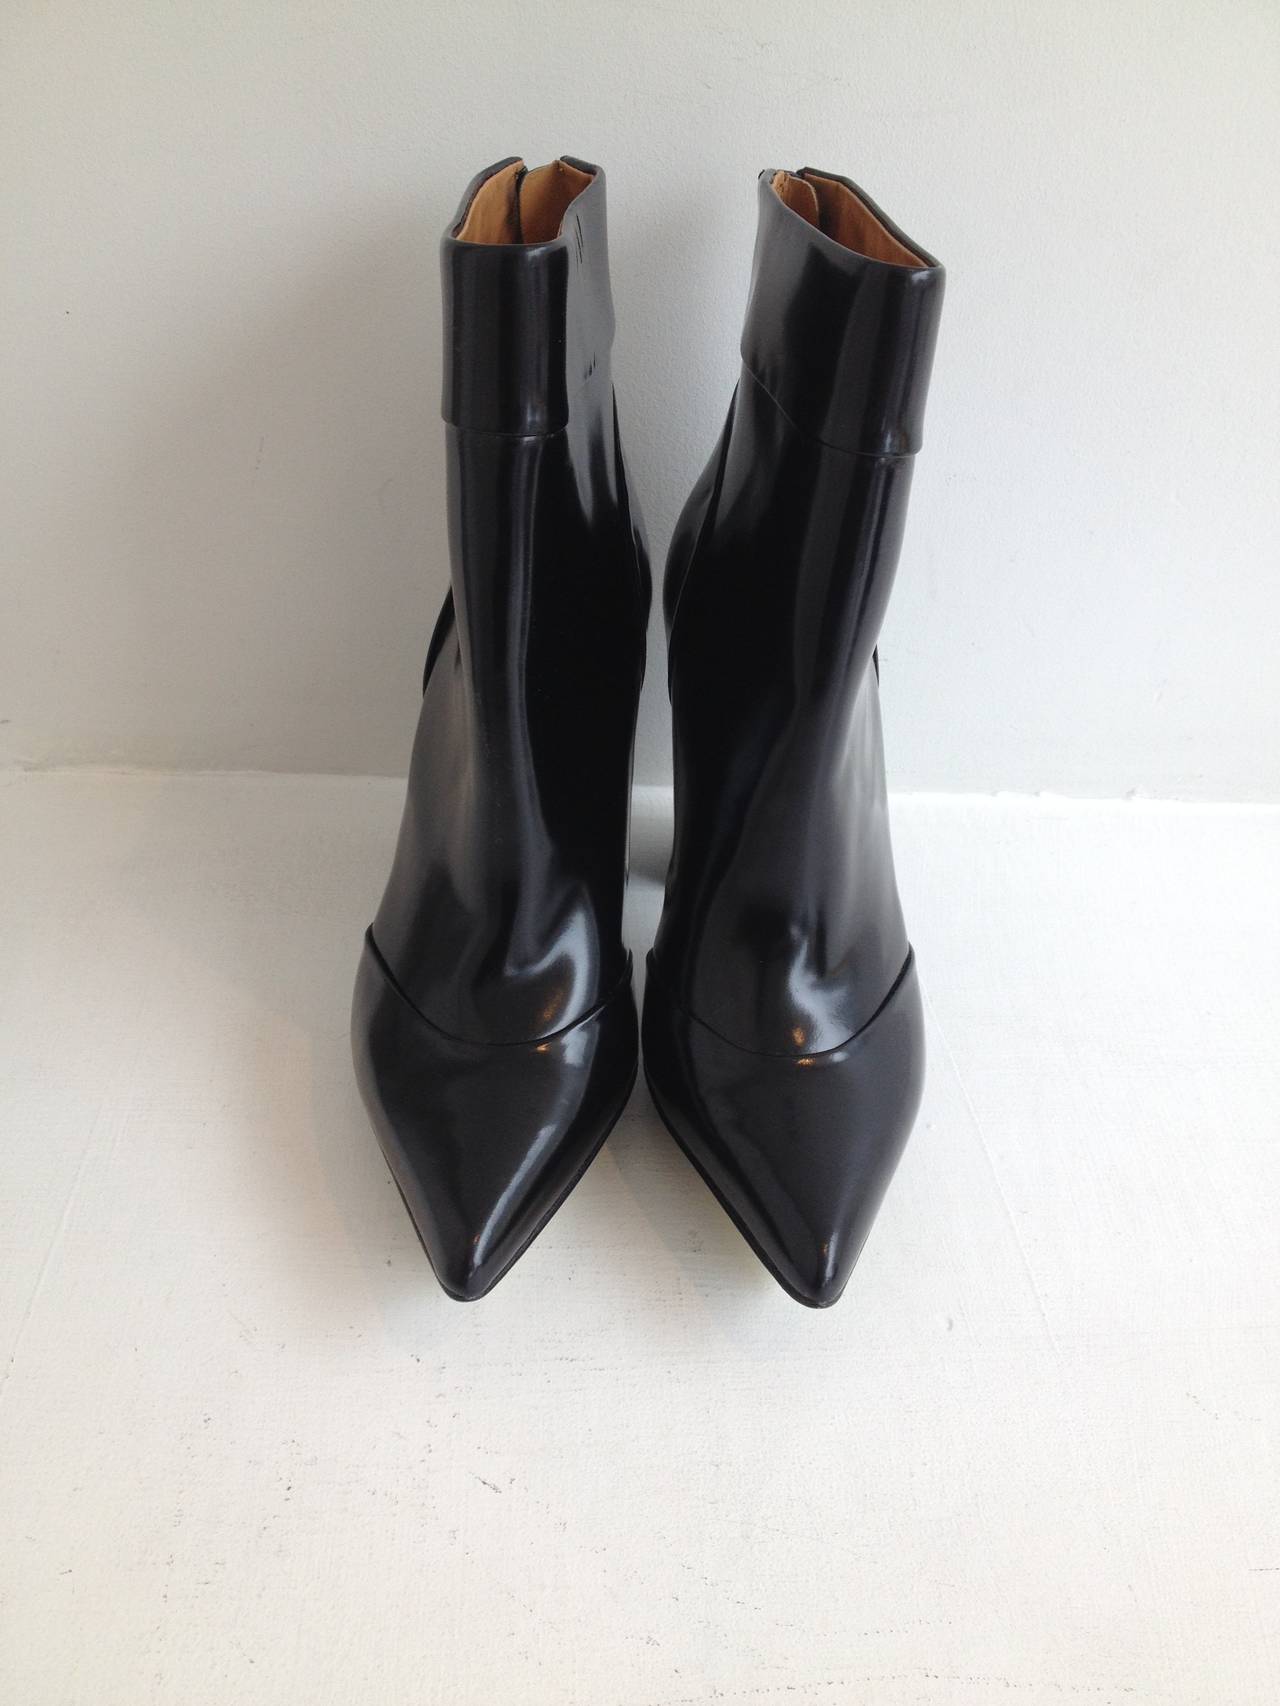 So sleek! These 3.1 Phillip Lim ankle boots are perfect because of how subtle they are - they blend into any outfit but quietly make the whole look more chic. The 4.125 inch heels elongate your silhouette, while the slim and clean shape of the boot